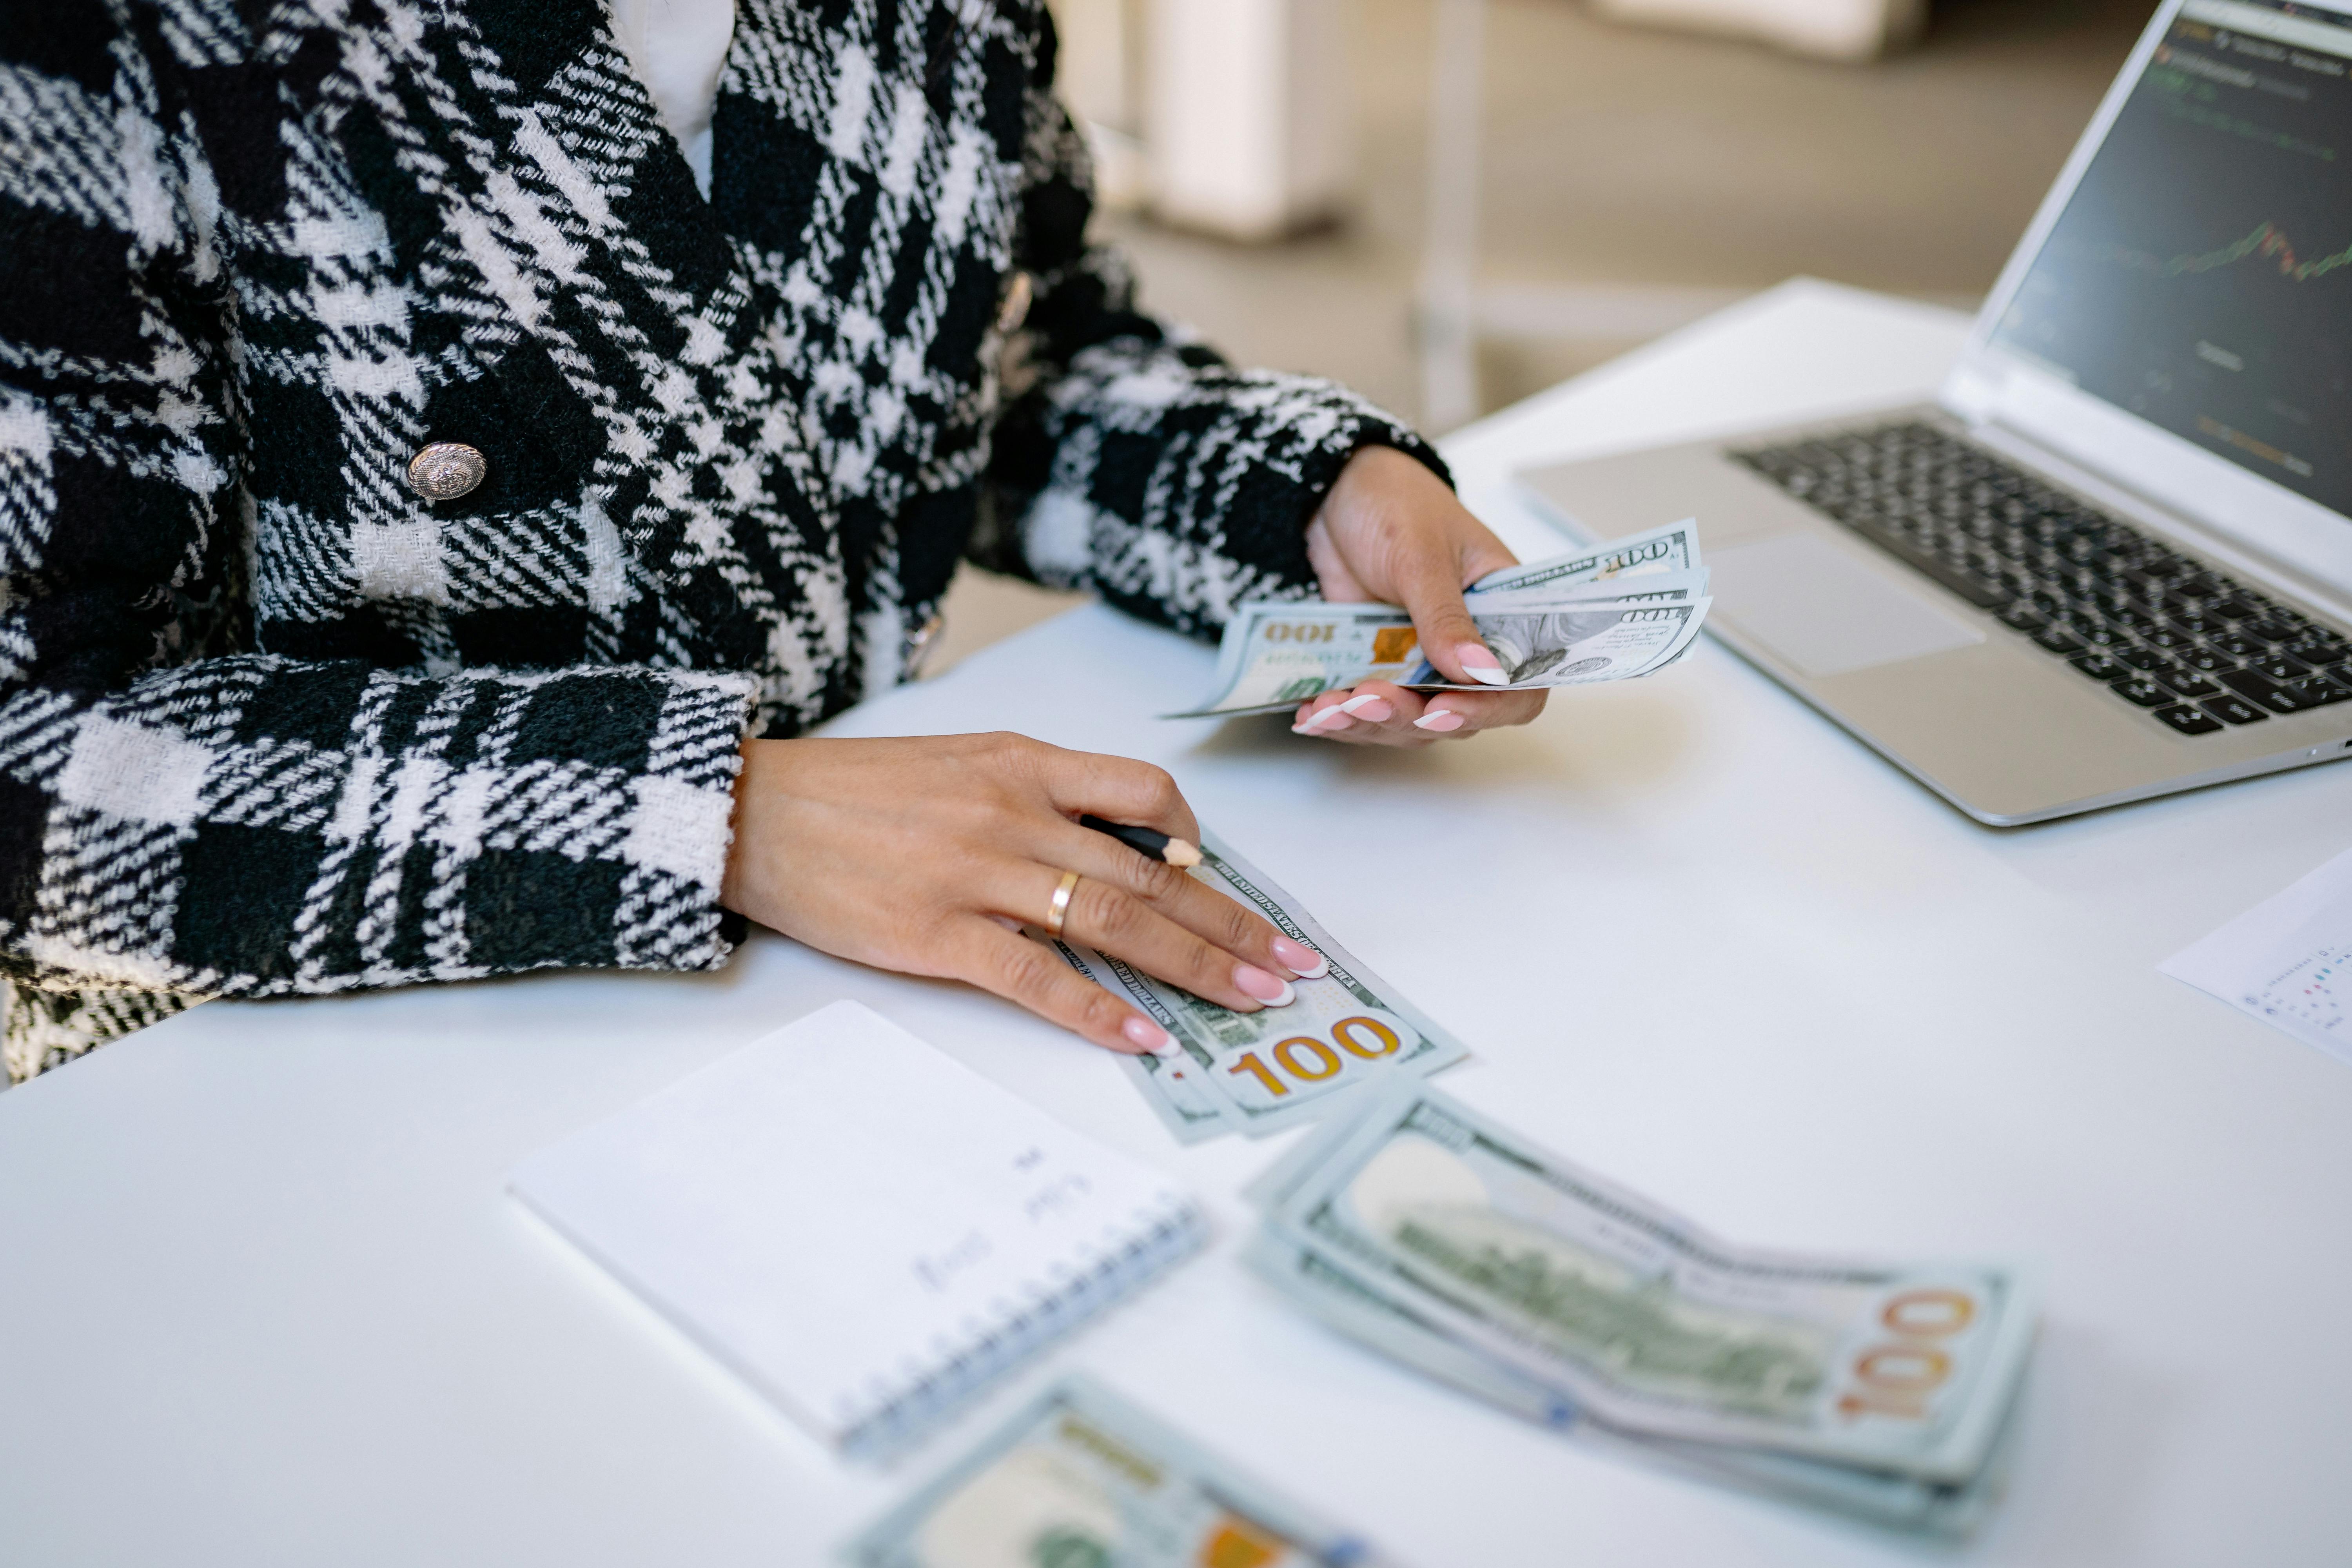 A person sitting on the table counting money | Source: Pexels